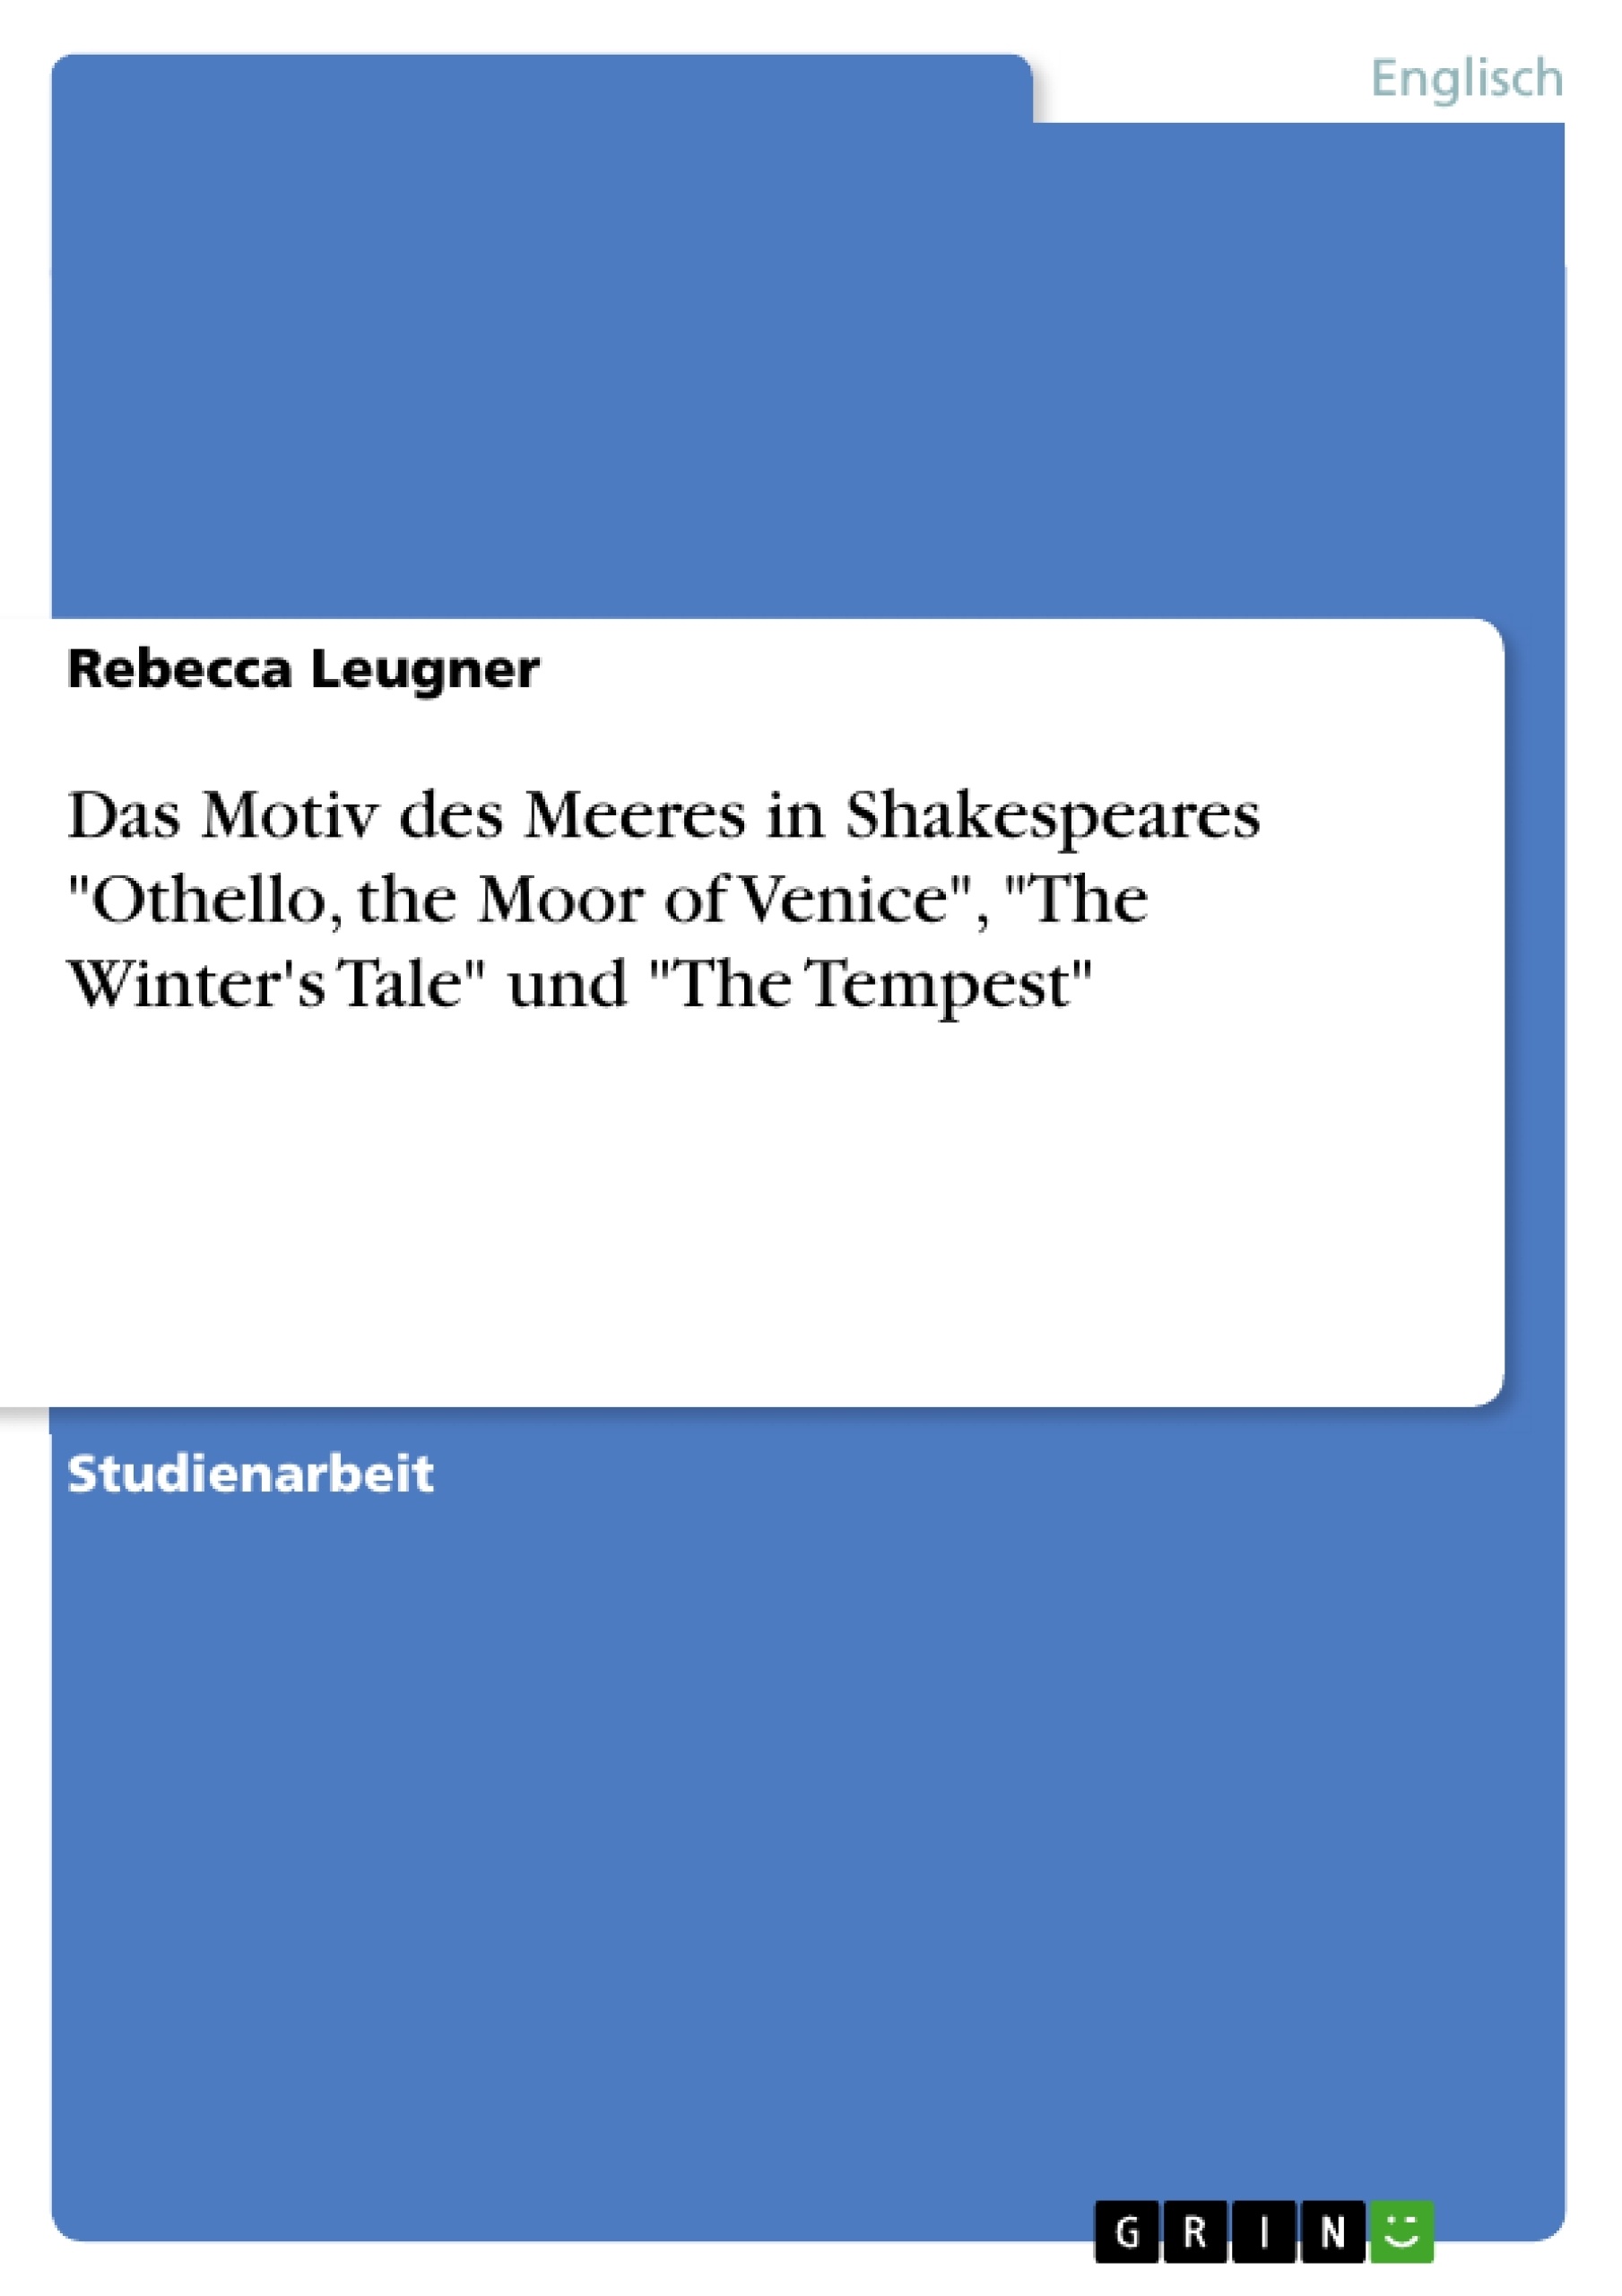 Titel: Das Motiv des Meeres in Shakespeares "Othello, the Moor of Venice", "The Winter's Tale" und "The Tempest"